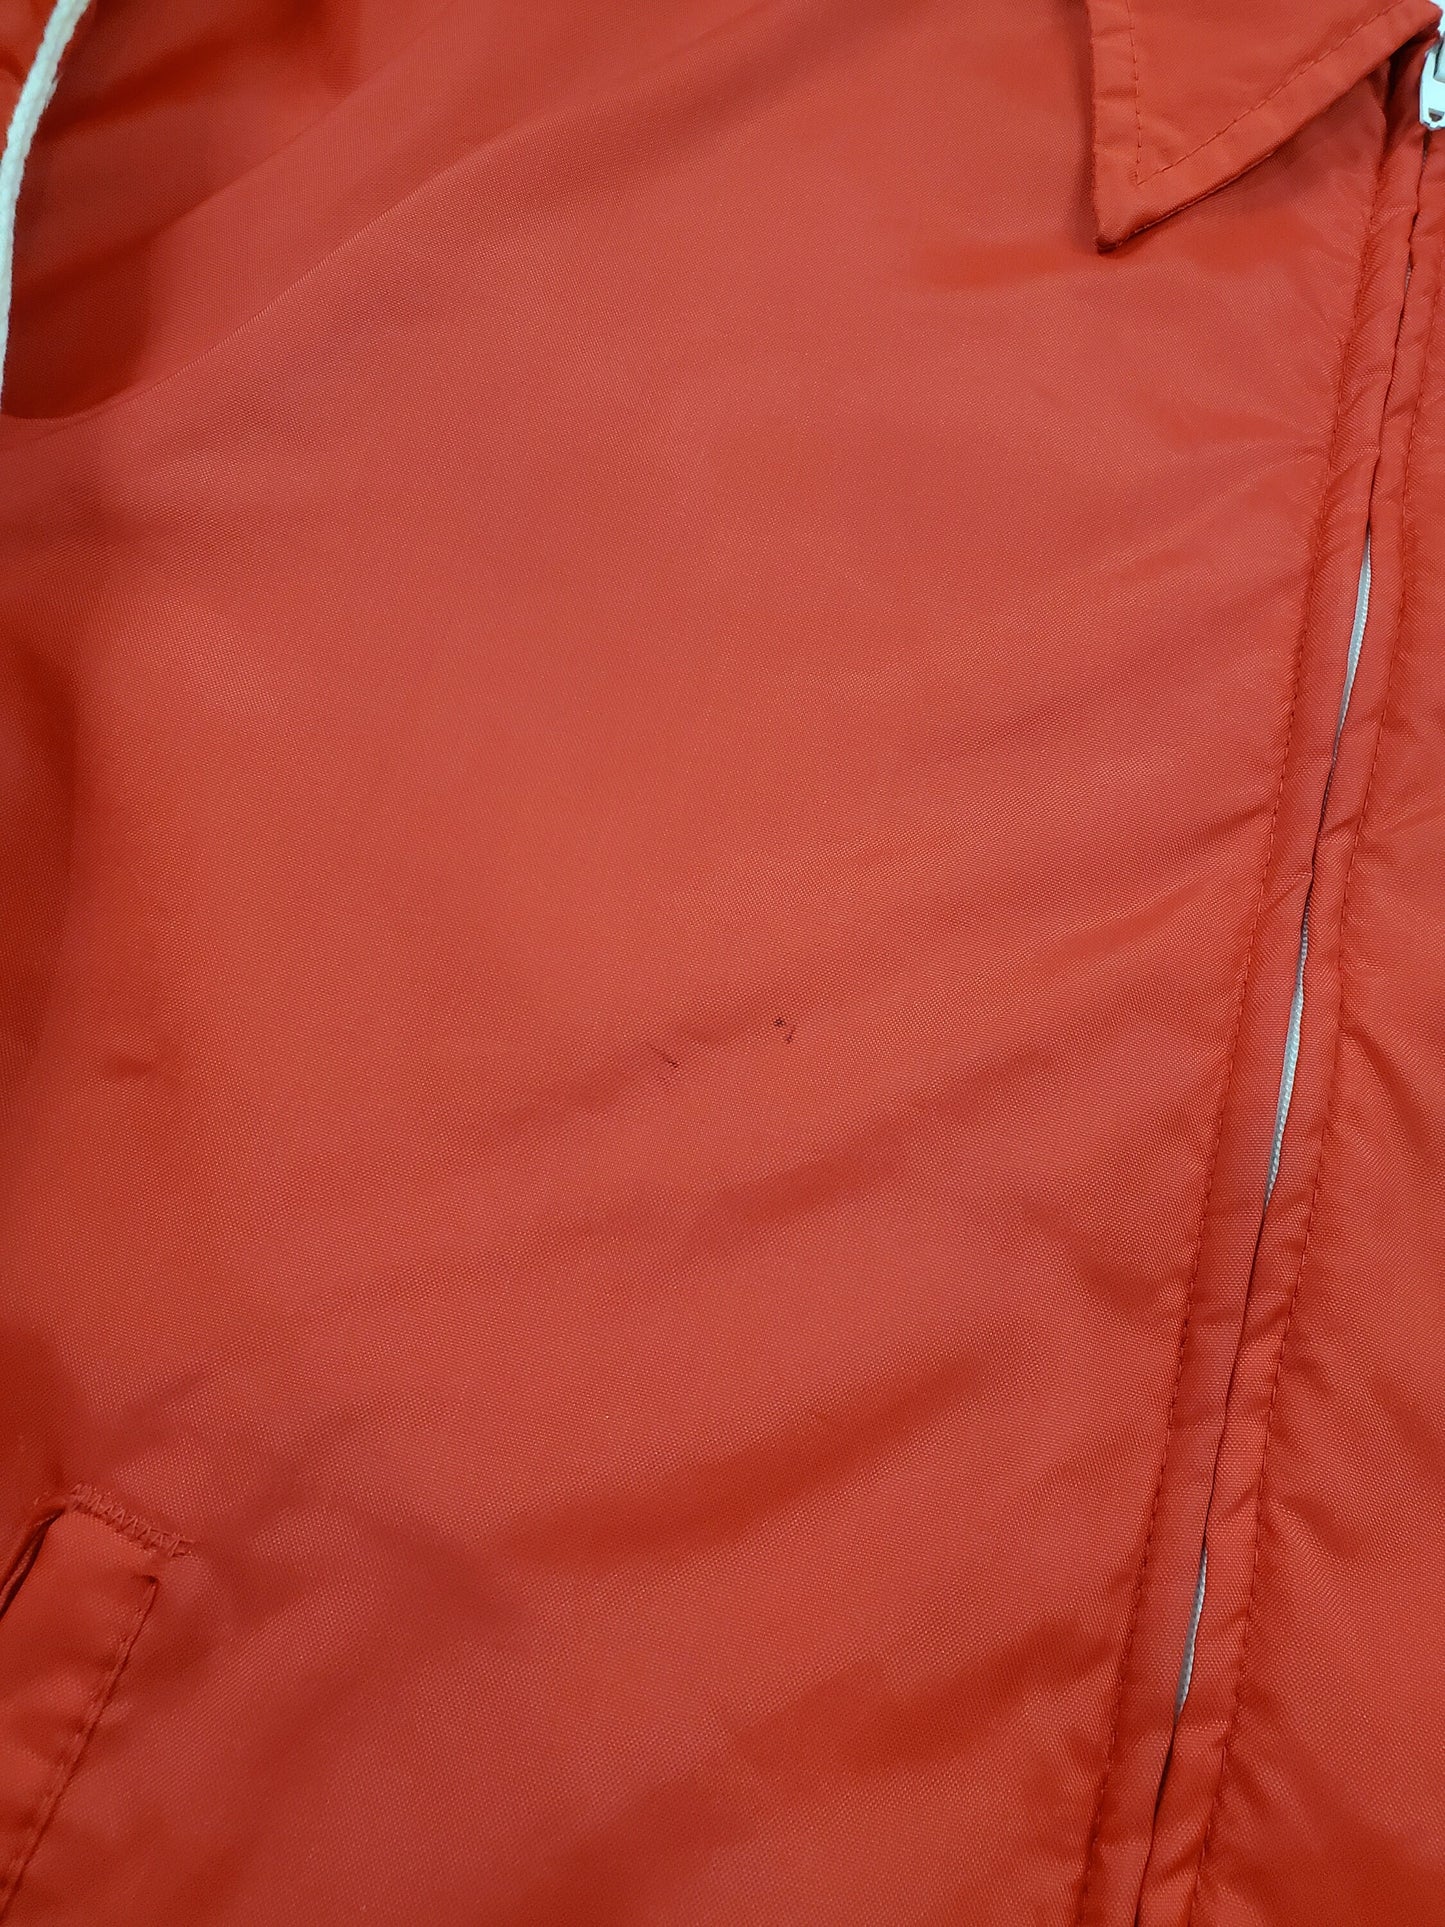 1980s Red Nylon Sports Jacket with Quilted Lining Size L